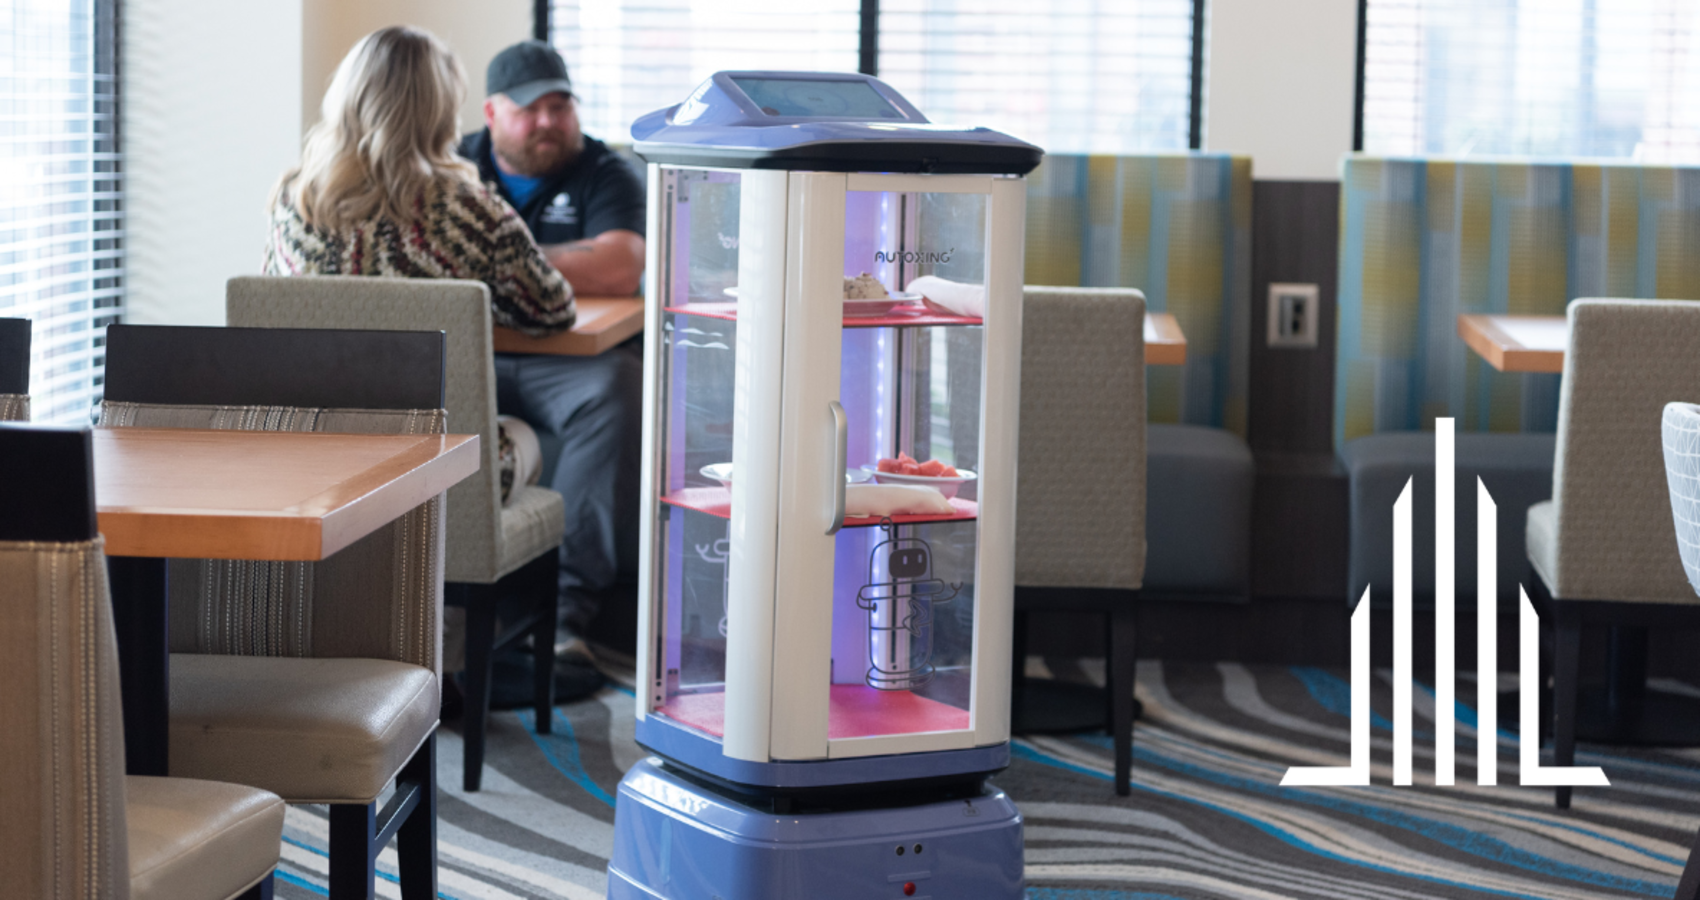 See Robots in Action at the Hilton Garden Inn Pittsburgh Airport Hotel